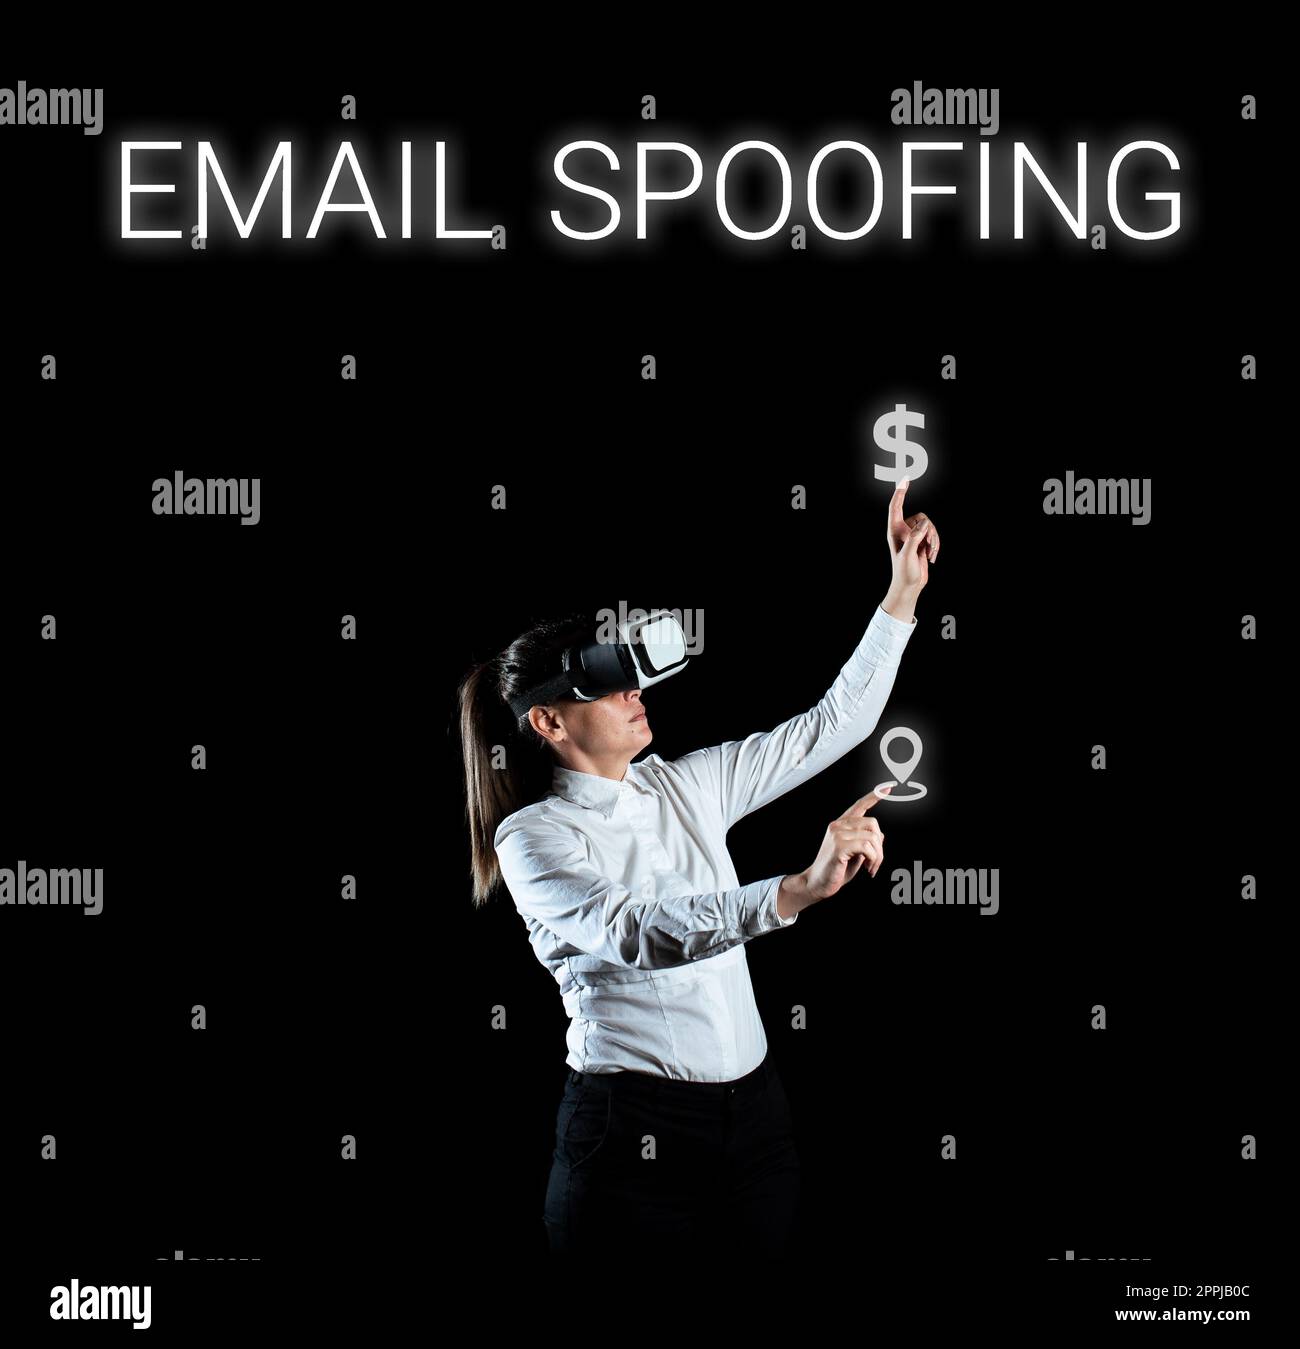 Text caption presenting Email Spoofing. Business overview secure the access and content of an email account or service Stock Photo